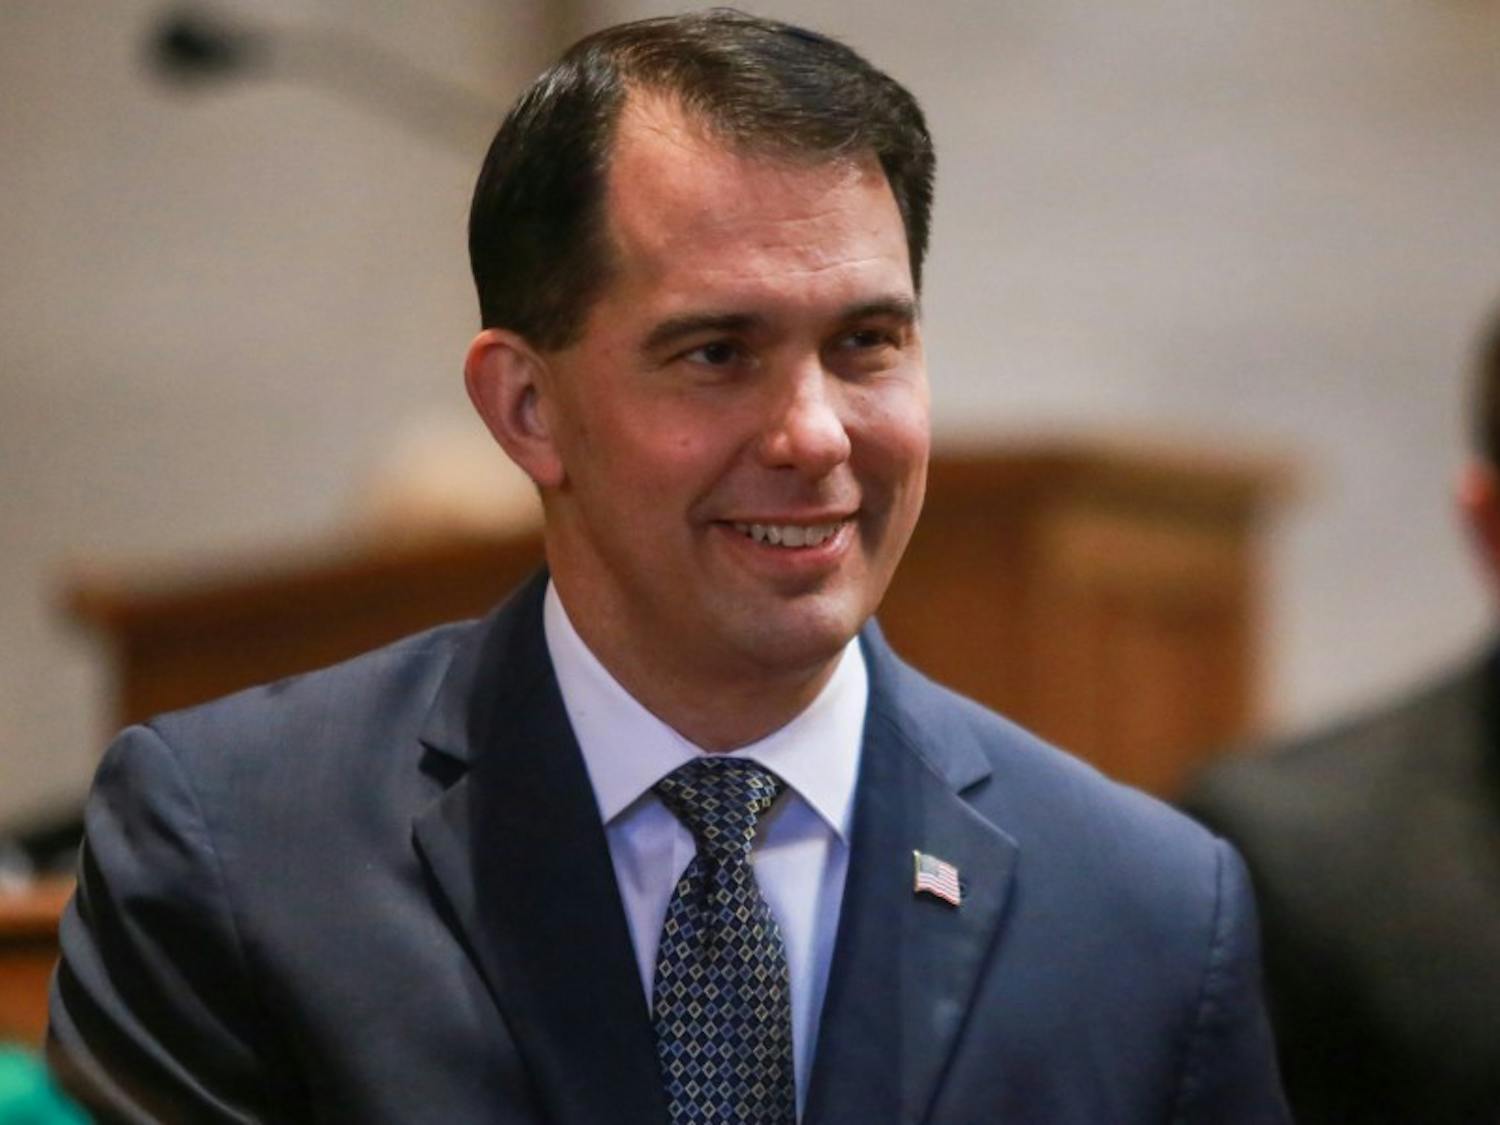 Gov. Scott Walker signed two bills Monday aimed at helping homeless individuals.